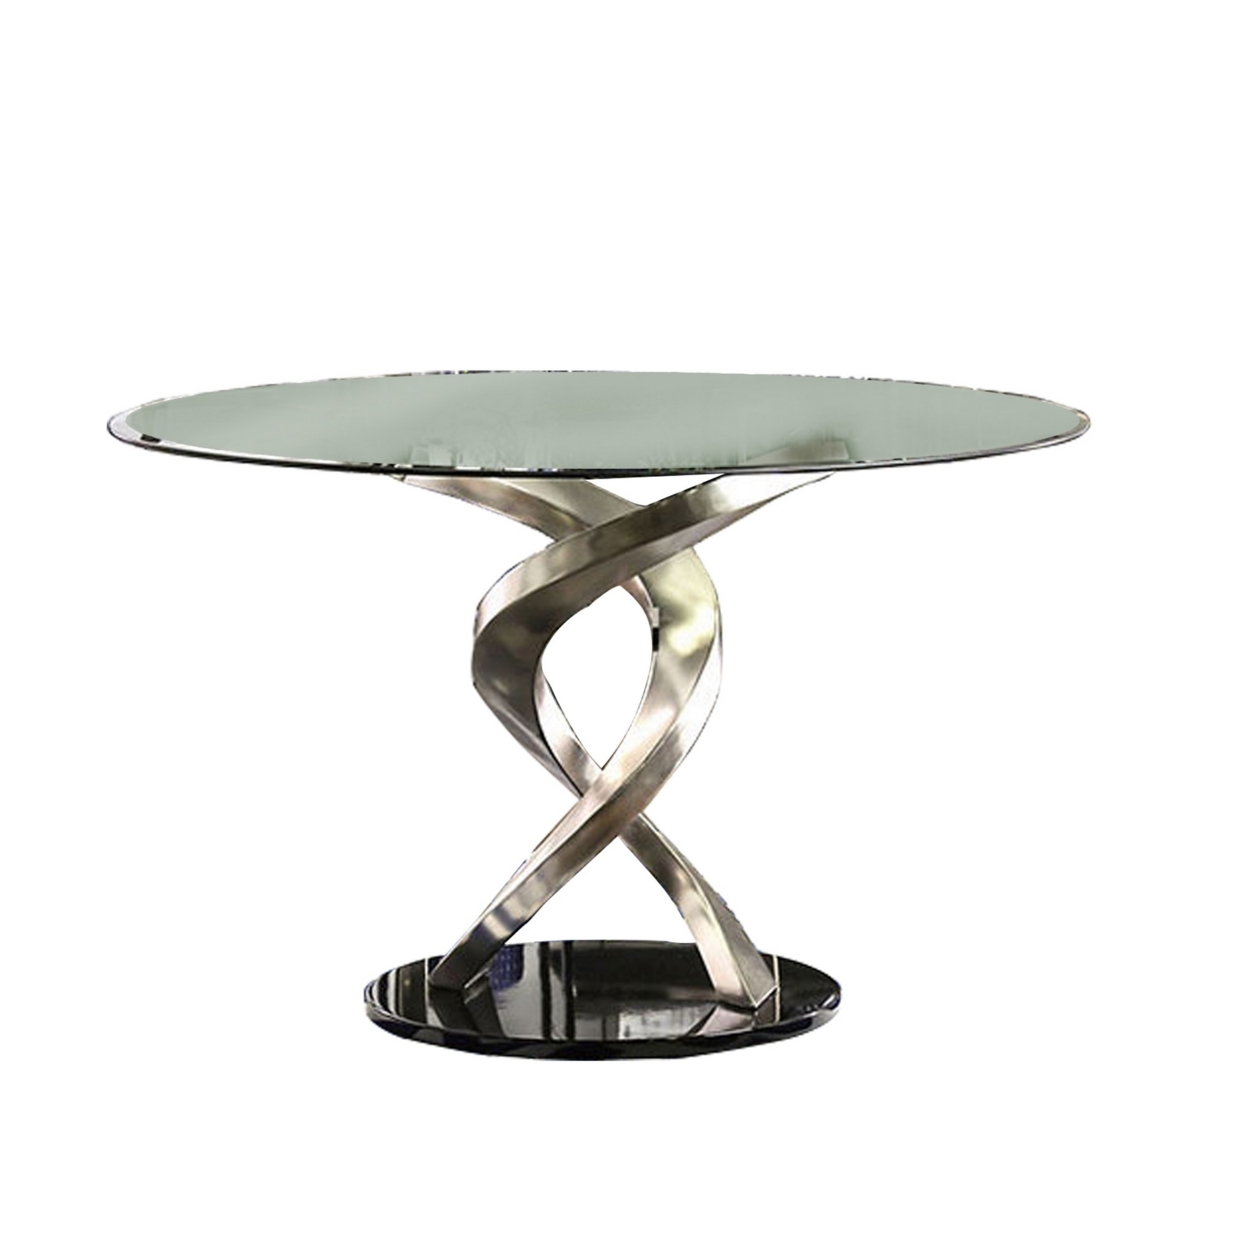 Contemporary Round Dining Table With Swirl Metal Base, Black And Silver- Saltoro Sherpi